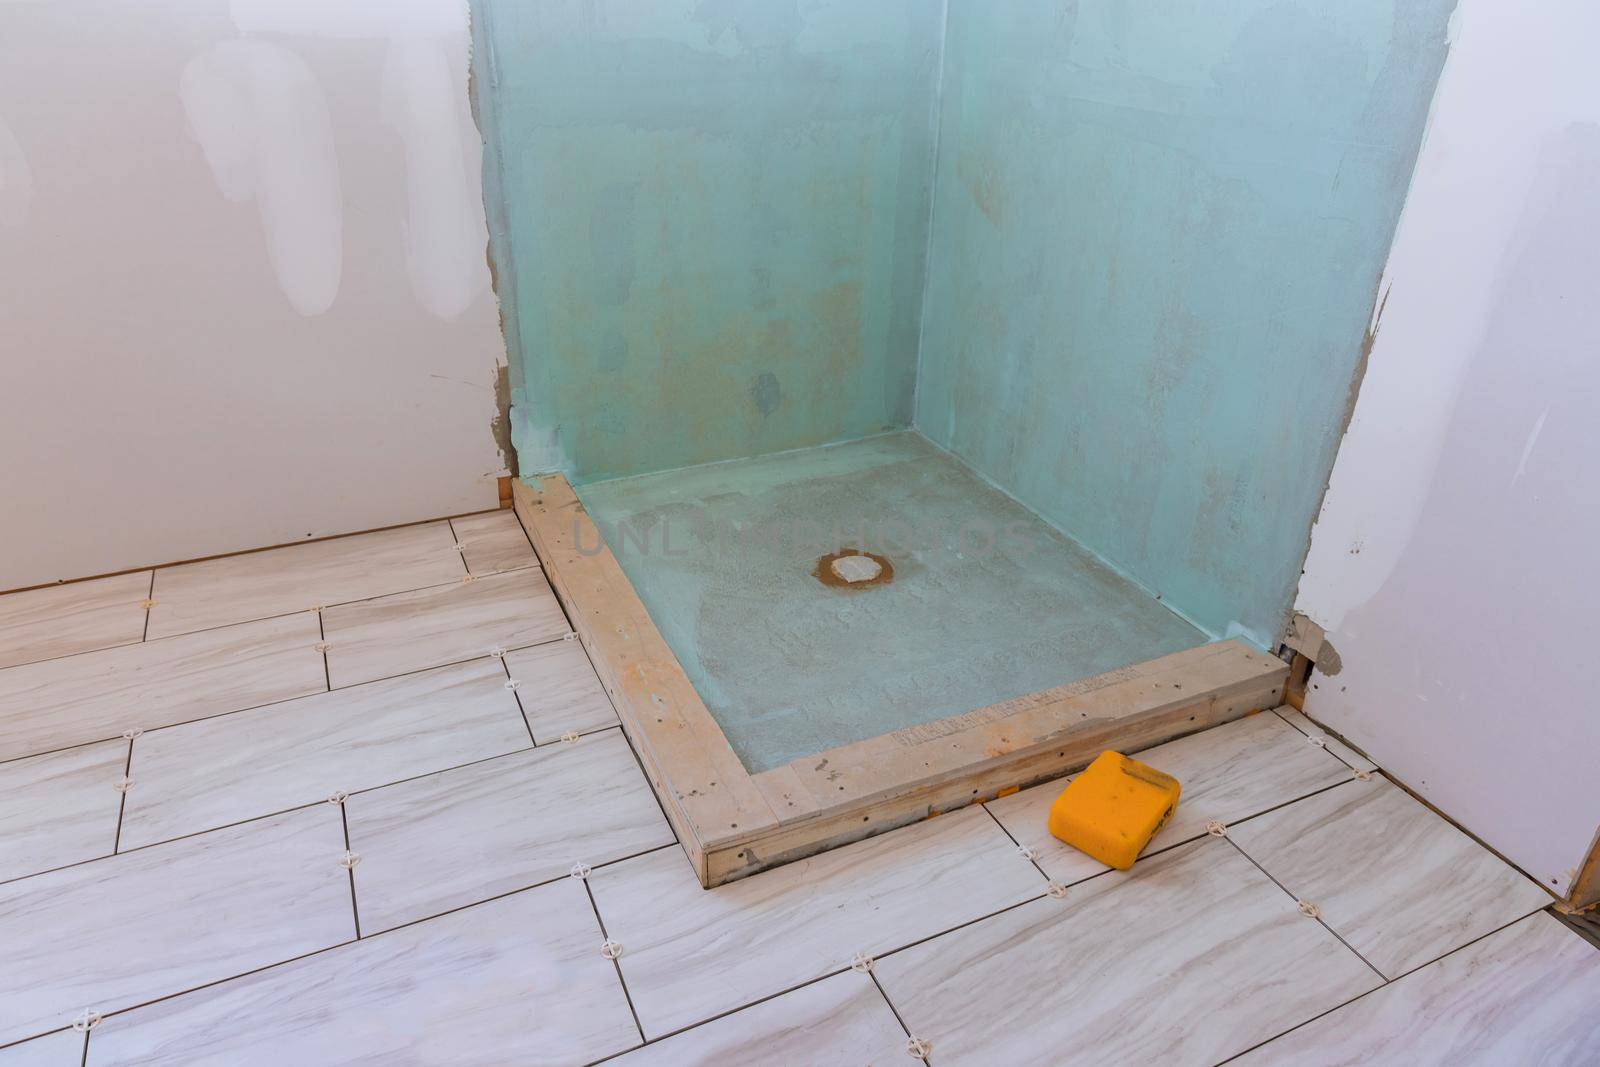 Under construction new bathtub remodeling a home bathroom with laying floor ceramic tile